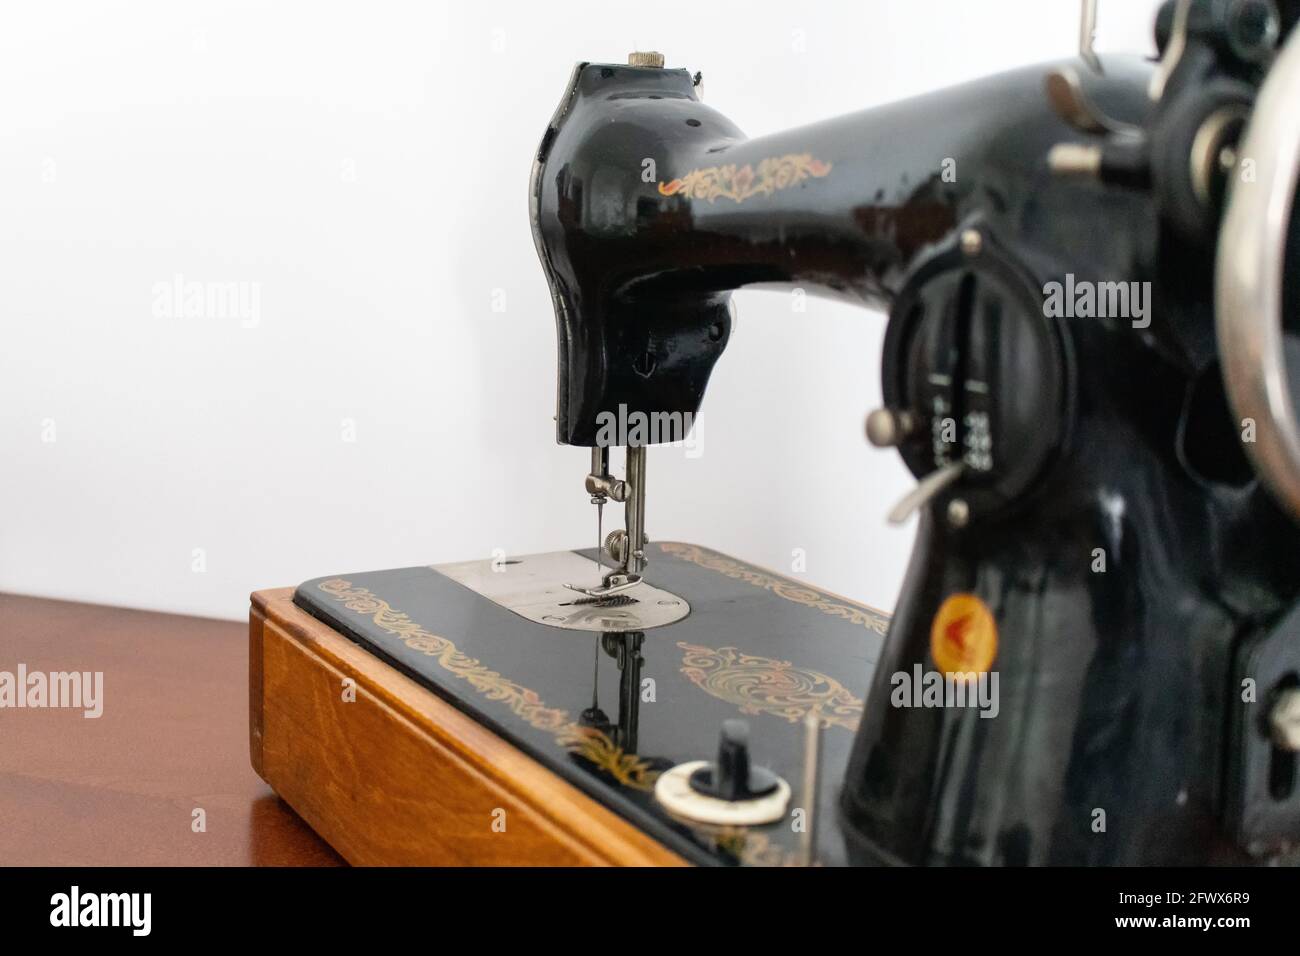 Old Singer sewing machine. Model Number 533 Stock Photo - Alamy